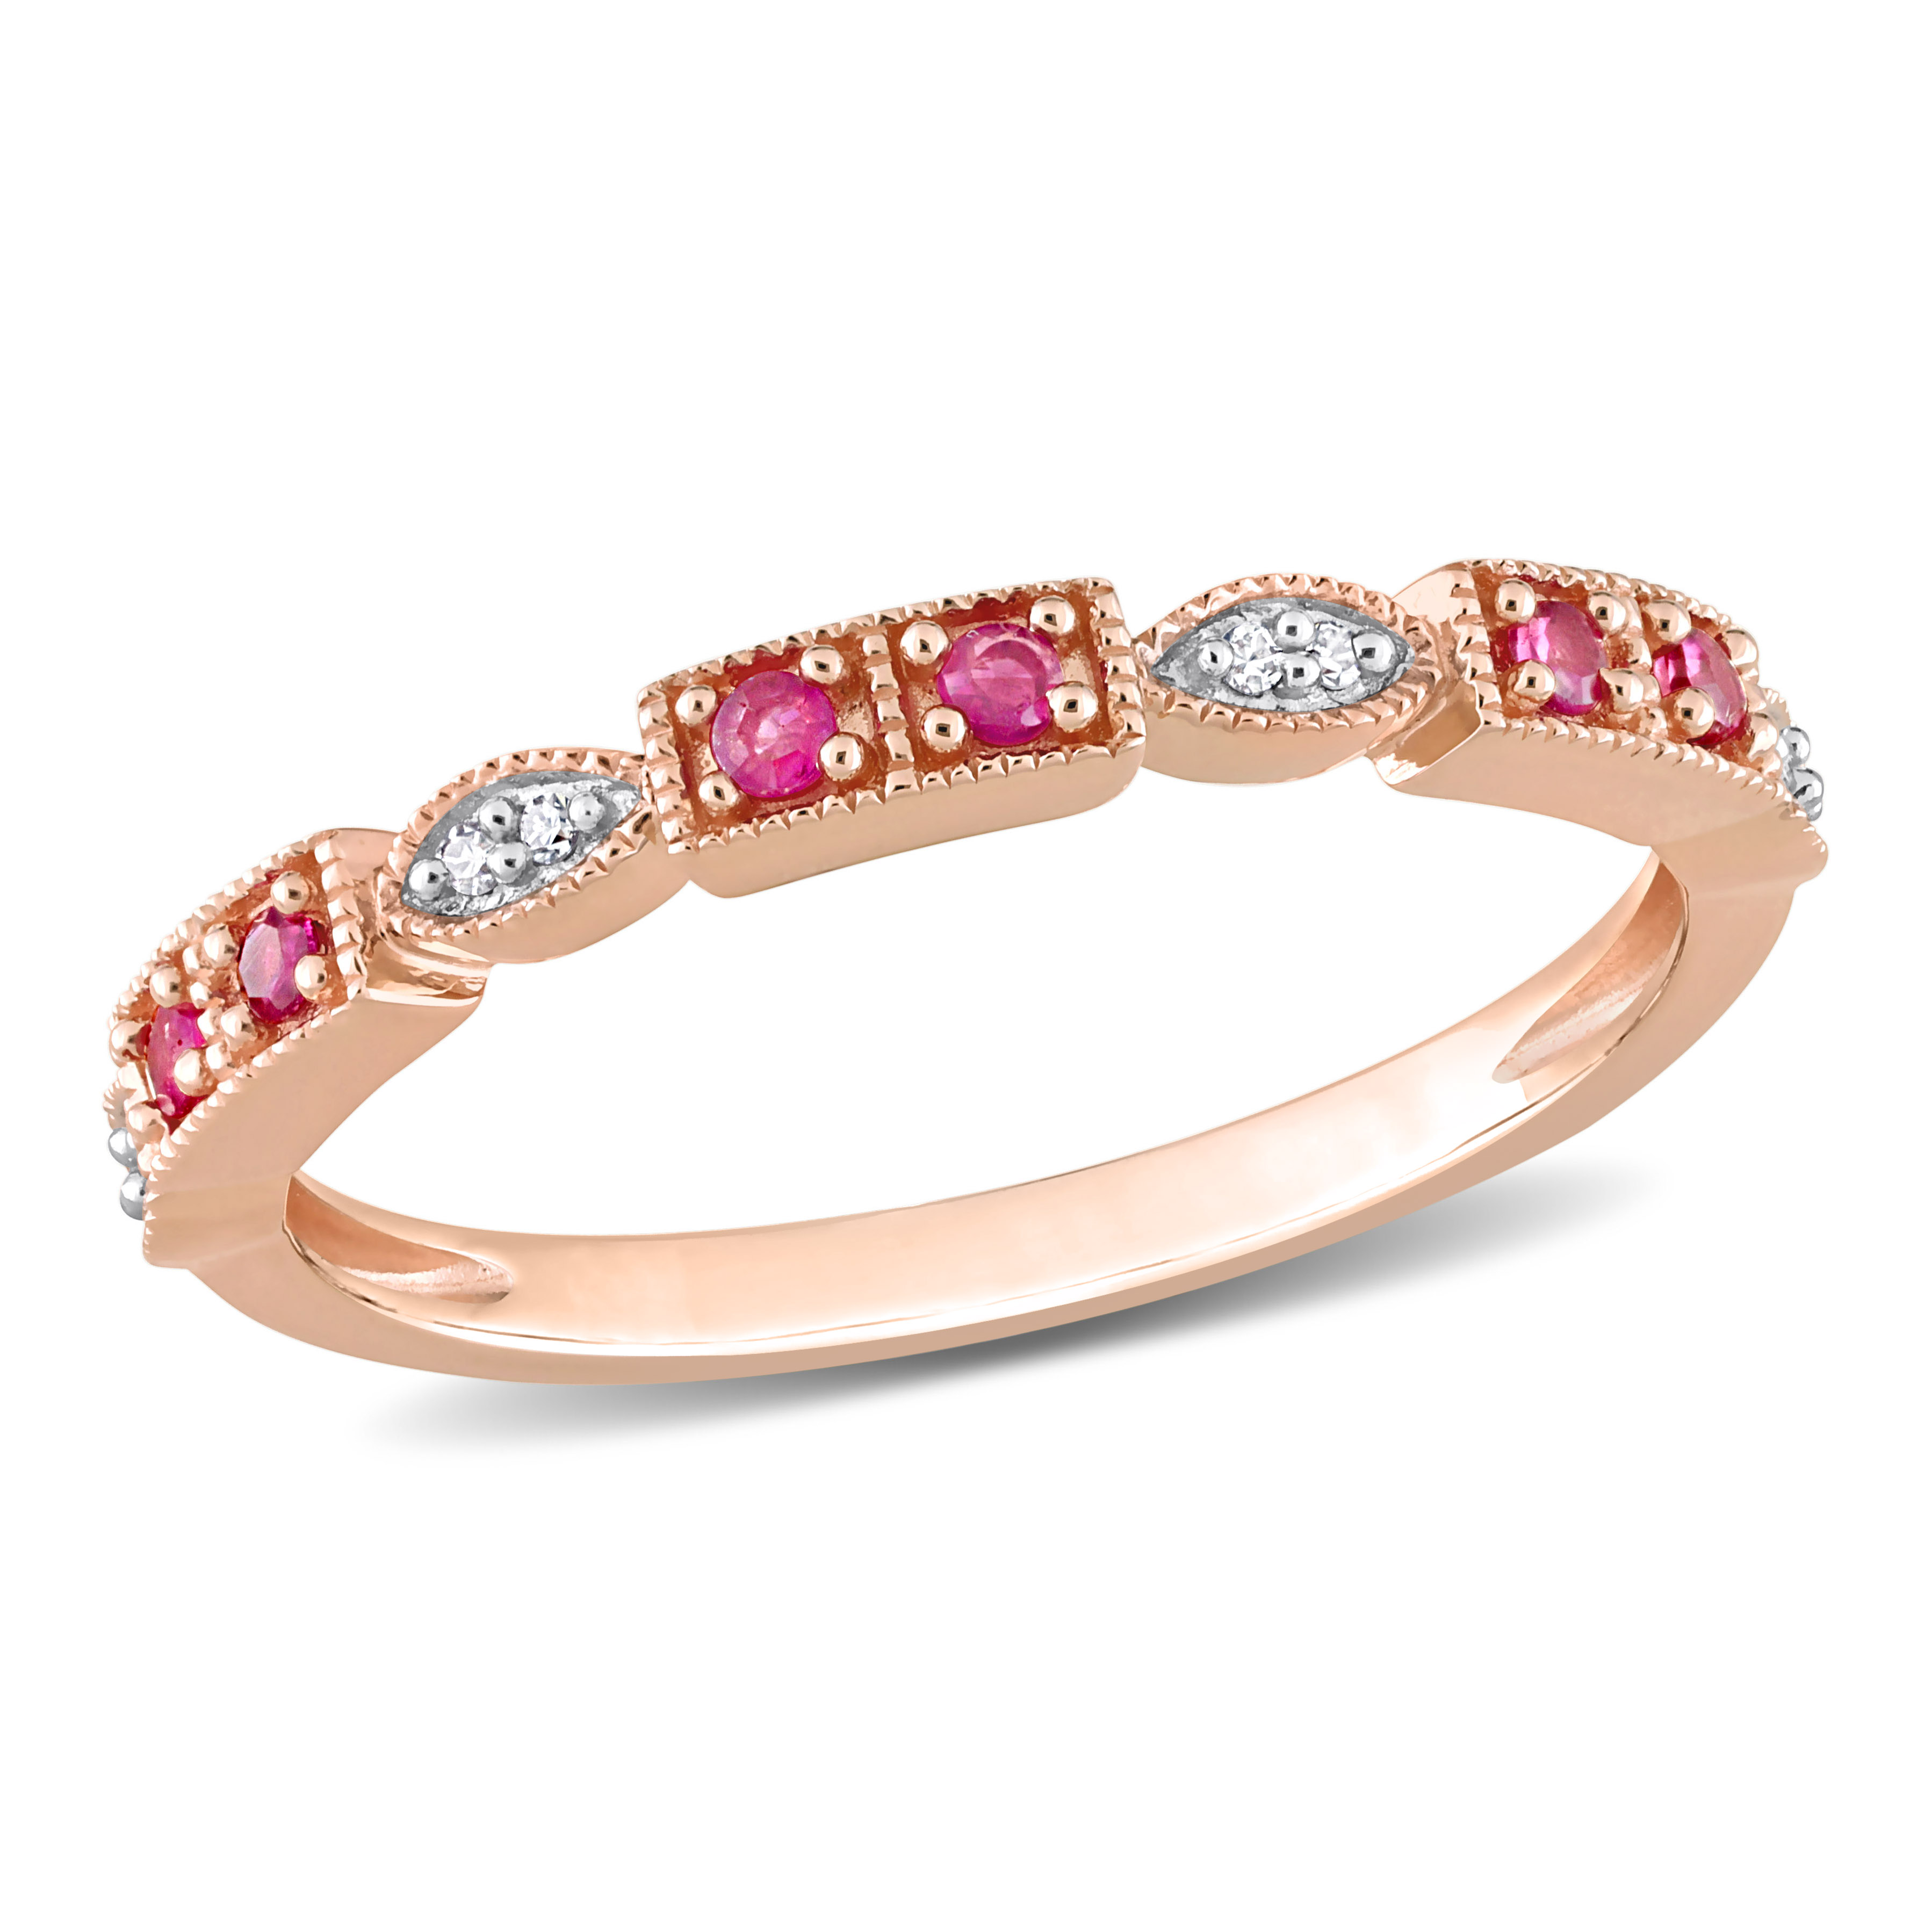 1/8 CT TGW Ruby and Diamond Accent Semi-Eternity Ring in 10k Rose Gold